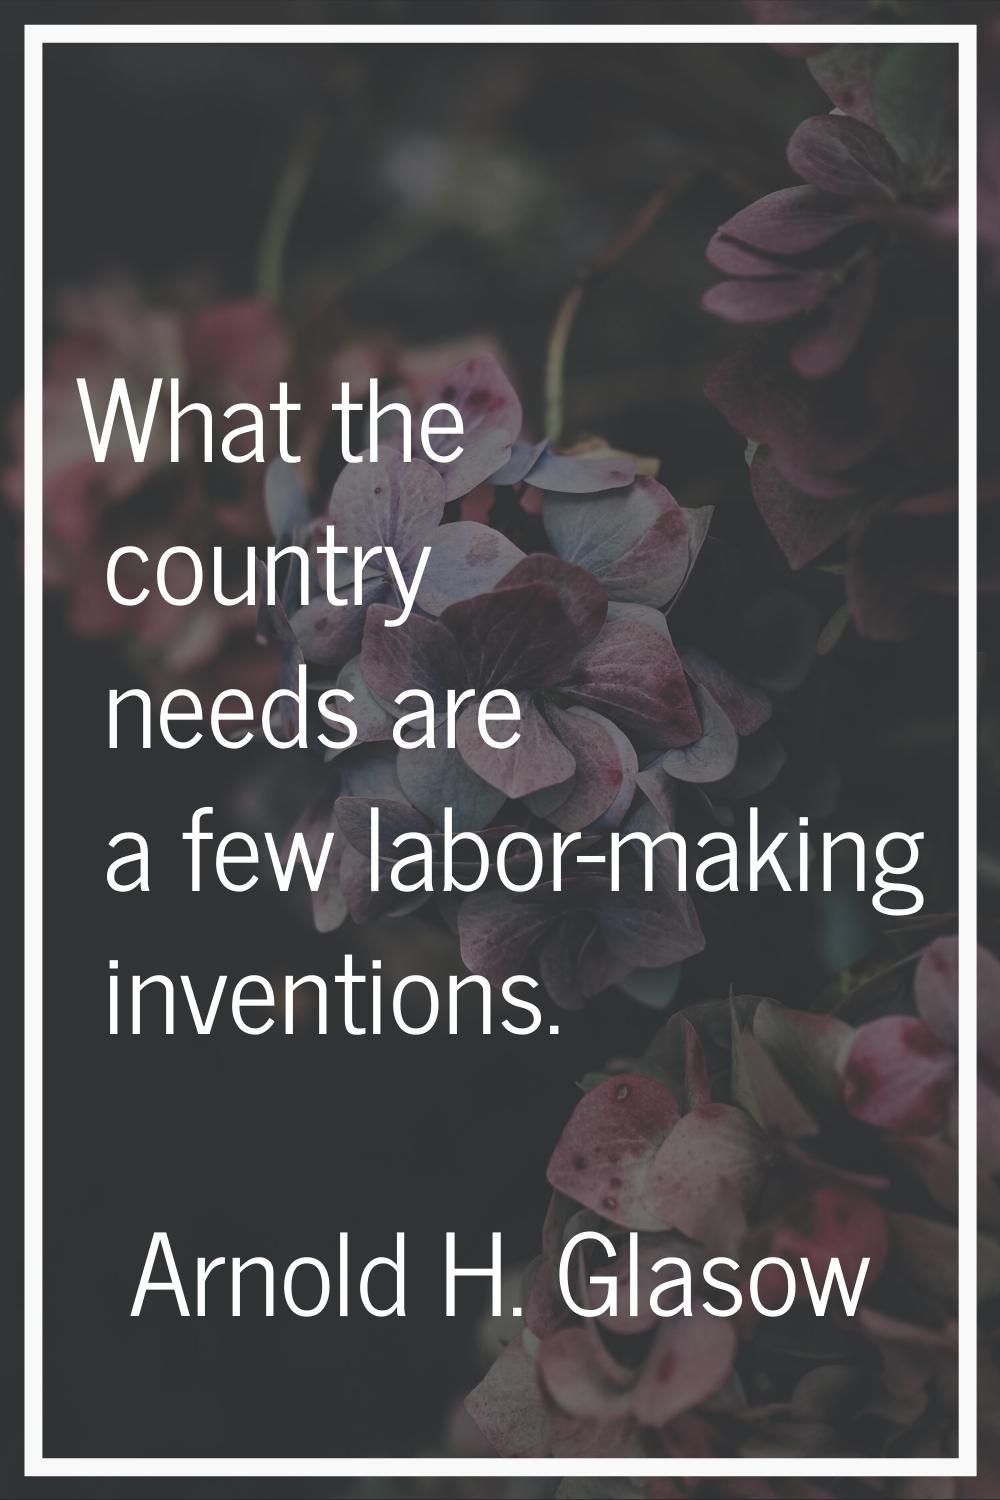 What the country needs are a few labor-making inventions.